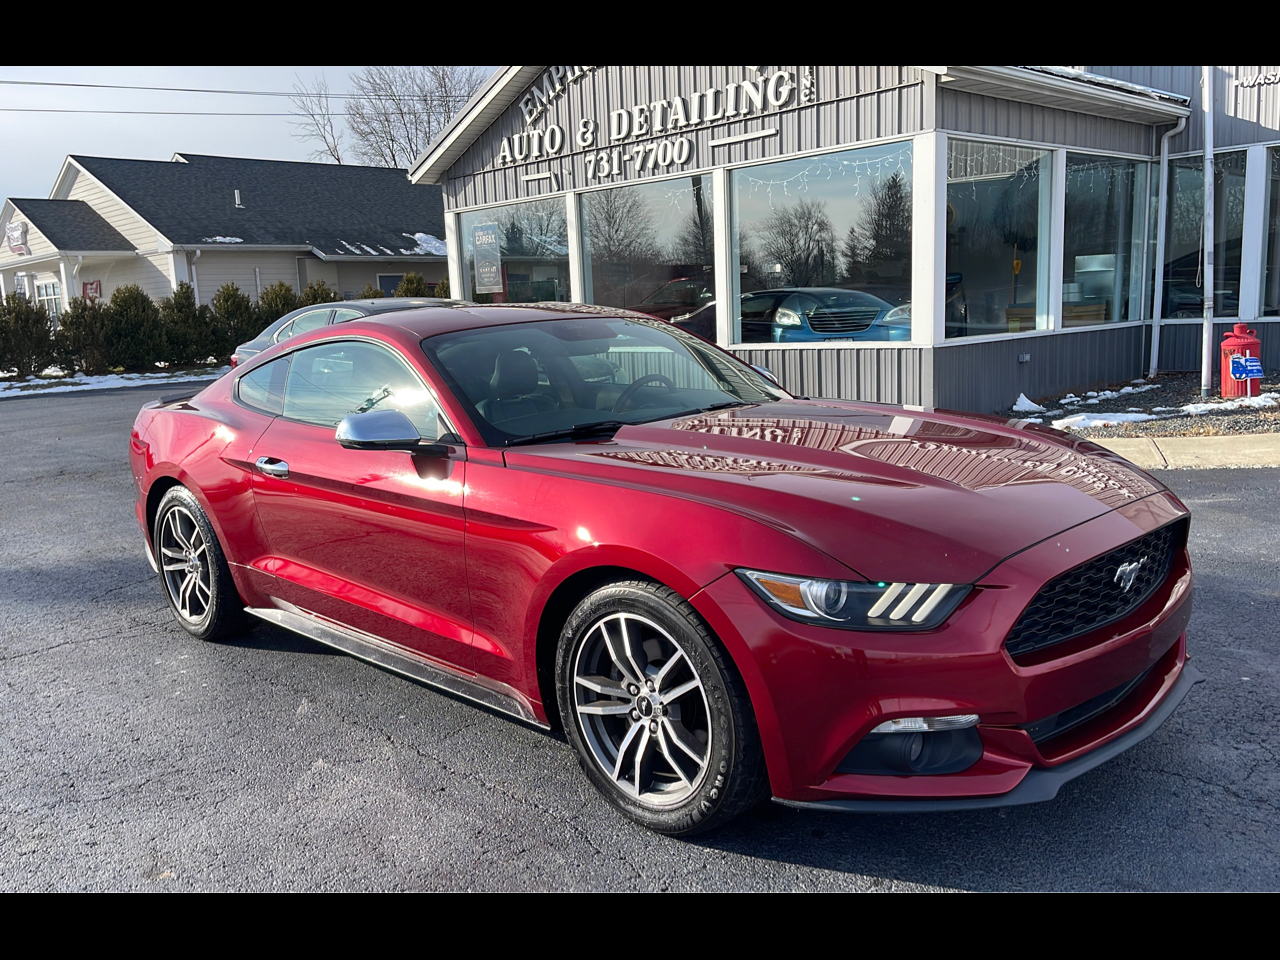 Ford Mustang EcoBoost Coupe 2015